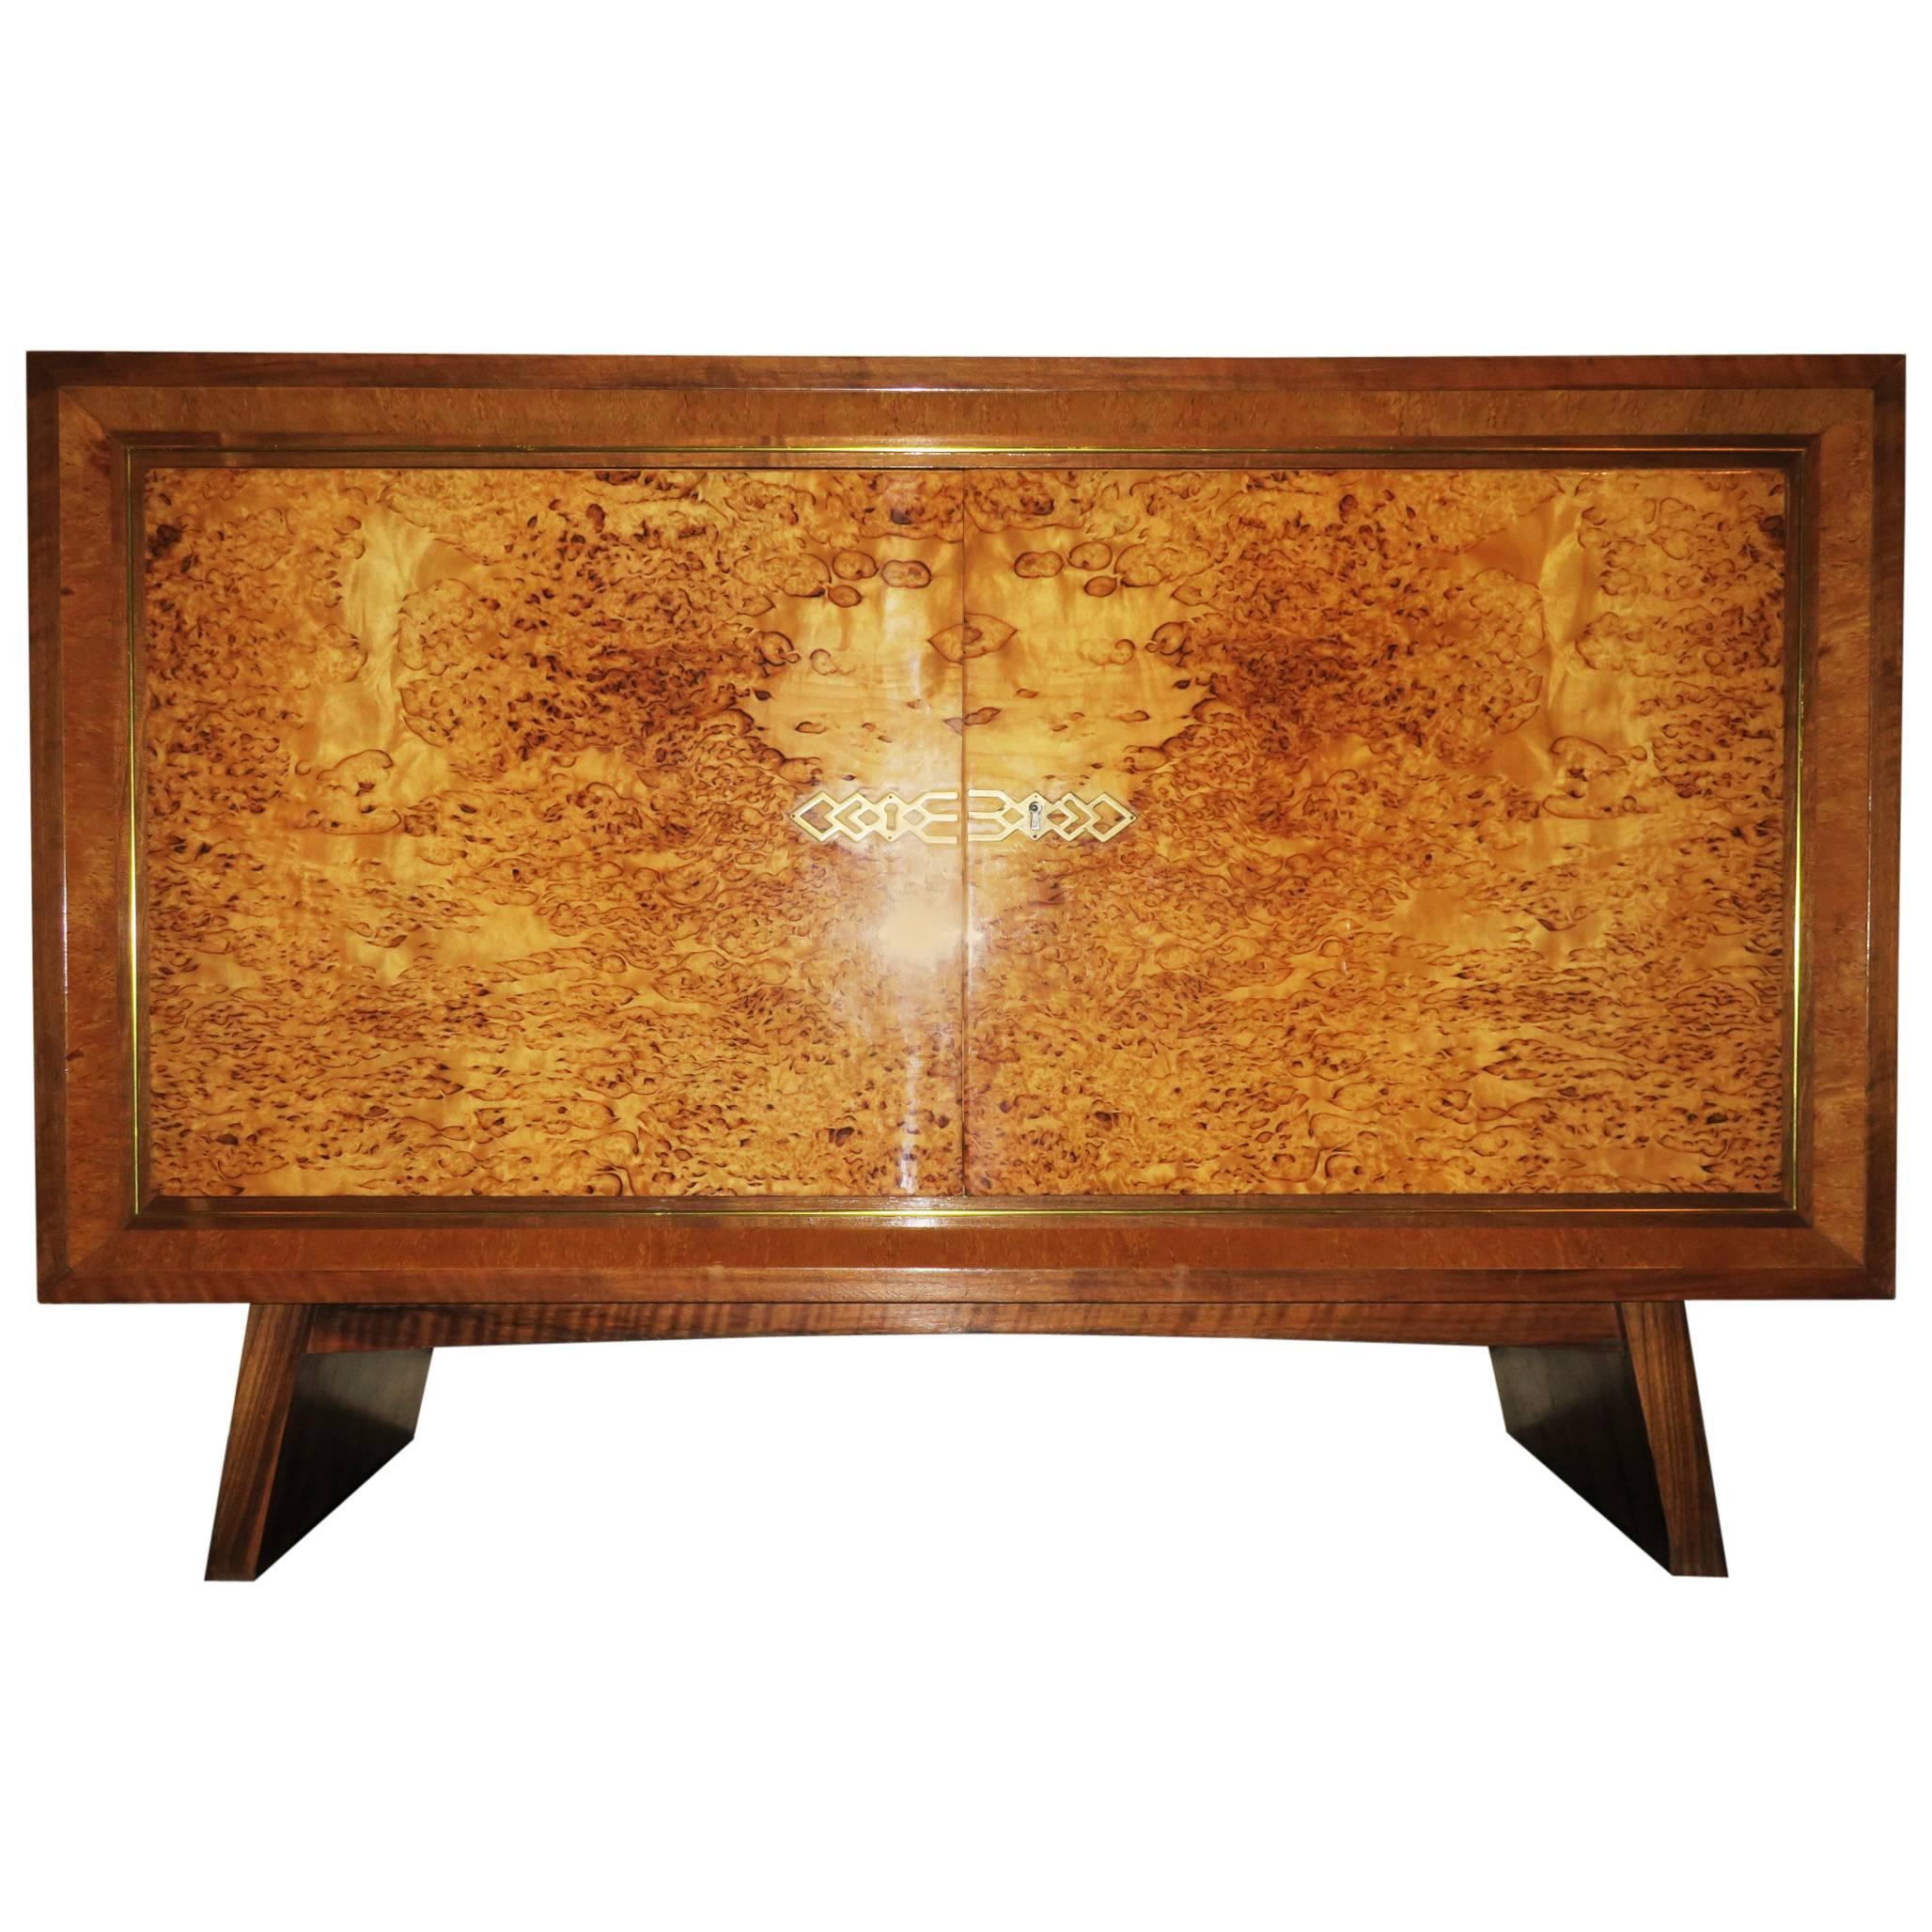 Fine Burl Walnut Art Deco Small Cabinet with Brass Fittings 1920-30 For Sale